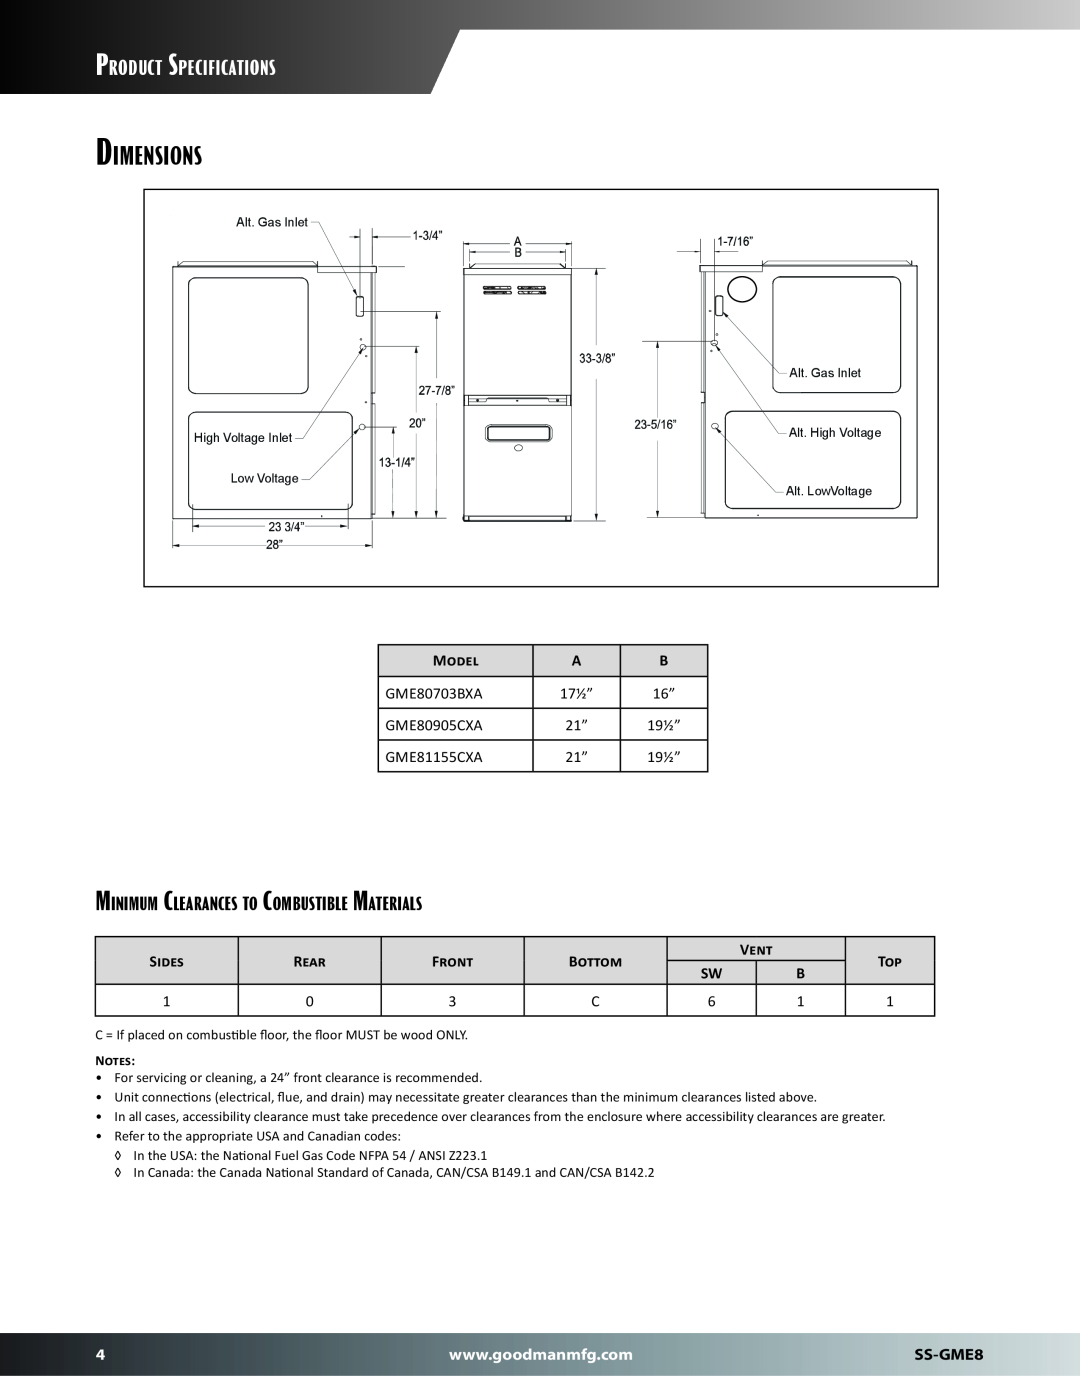 Goodman Mfg SS-GME8 Dimensions, Product Specifications, Minimum Clearances to Combustible Materials, Model, Sides, Rear 